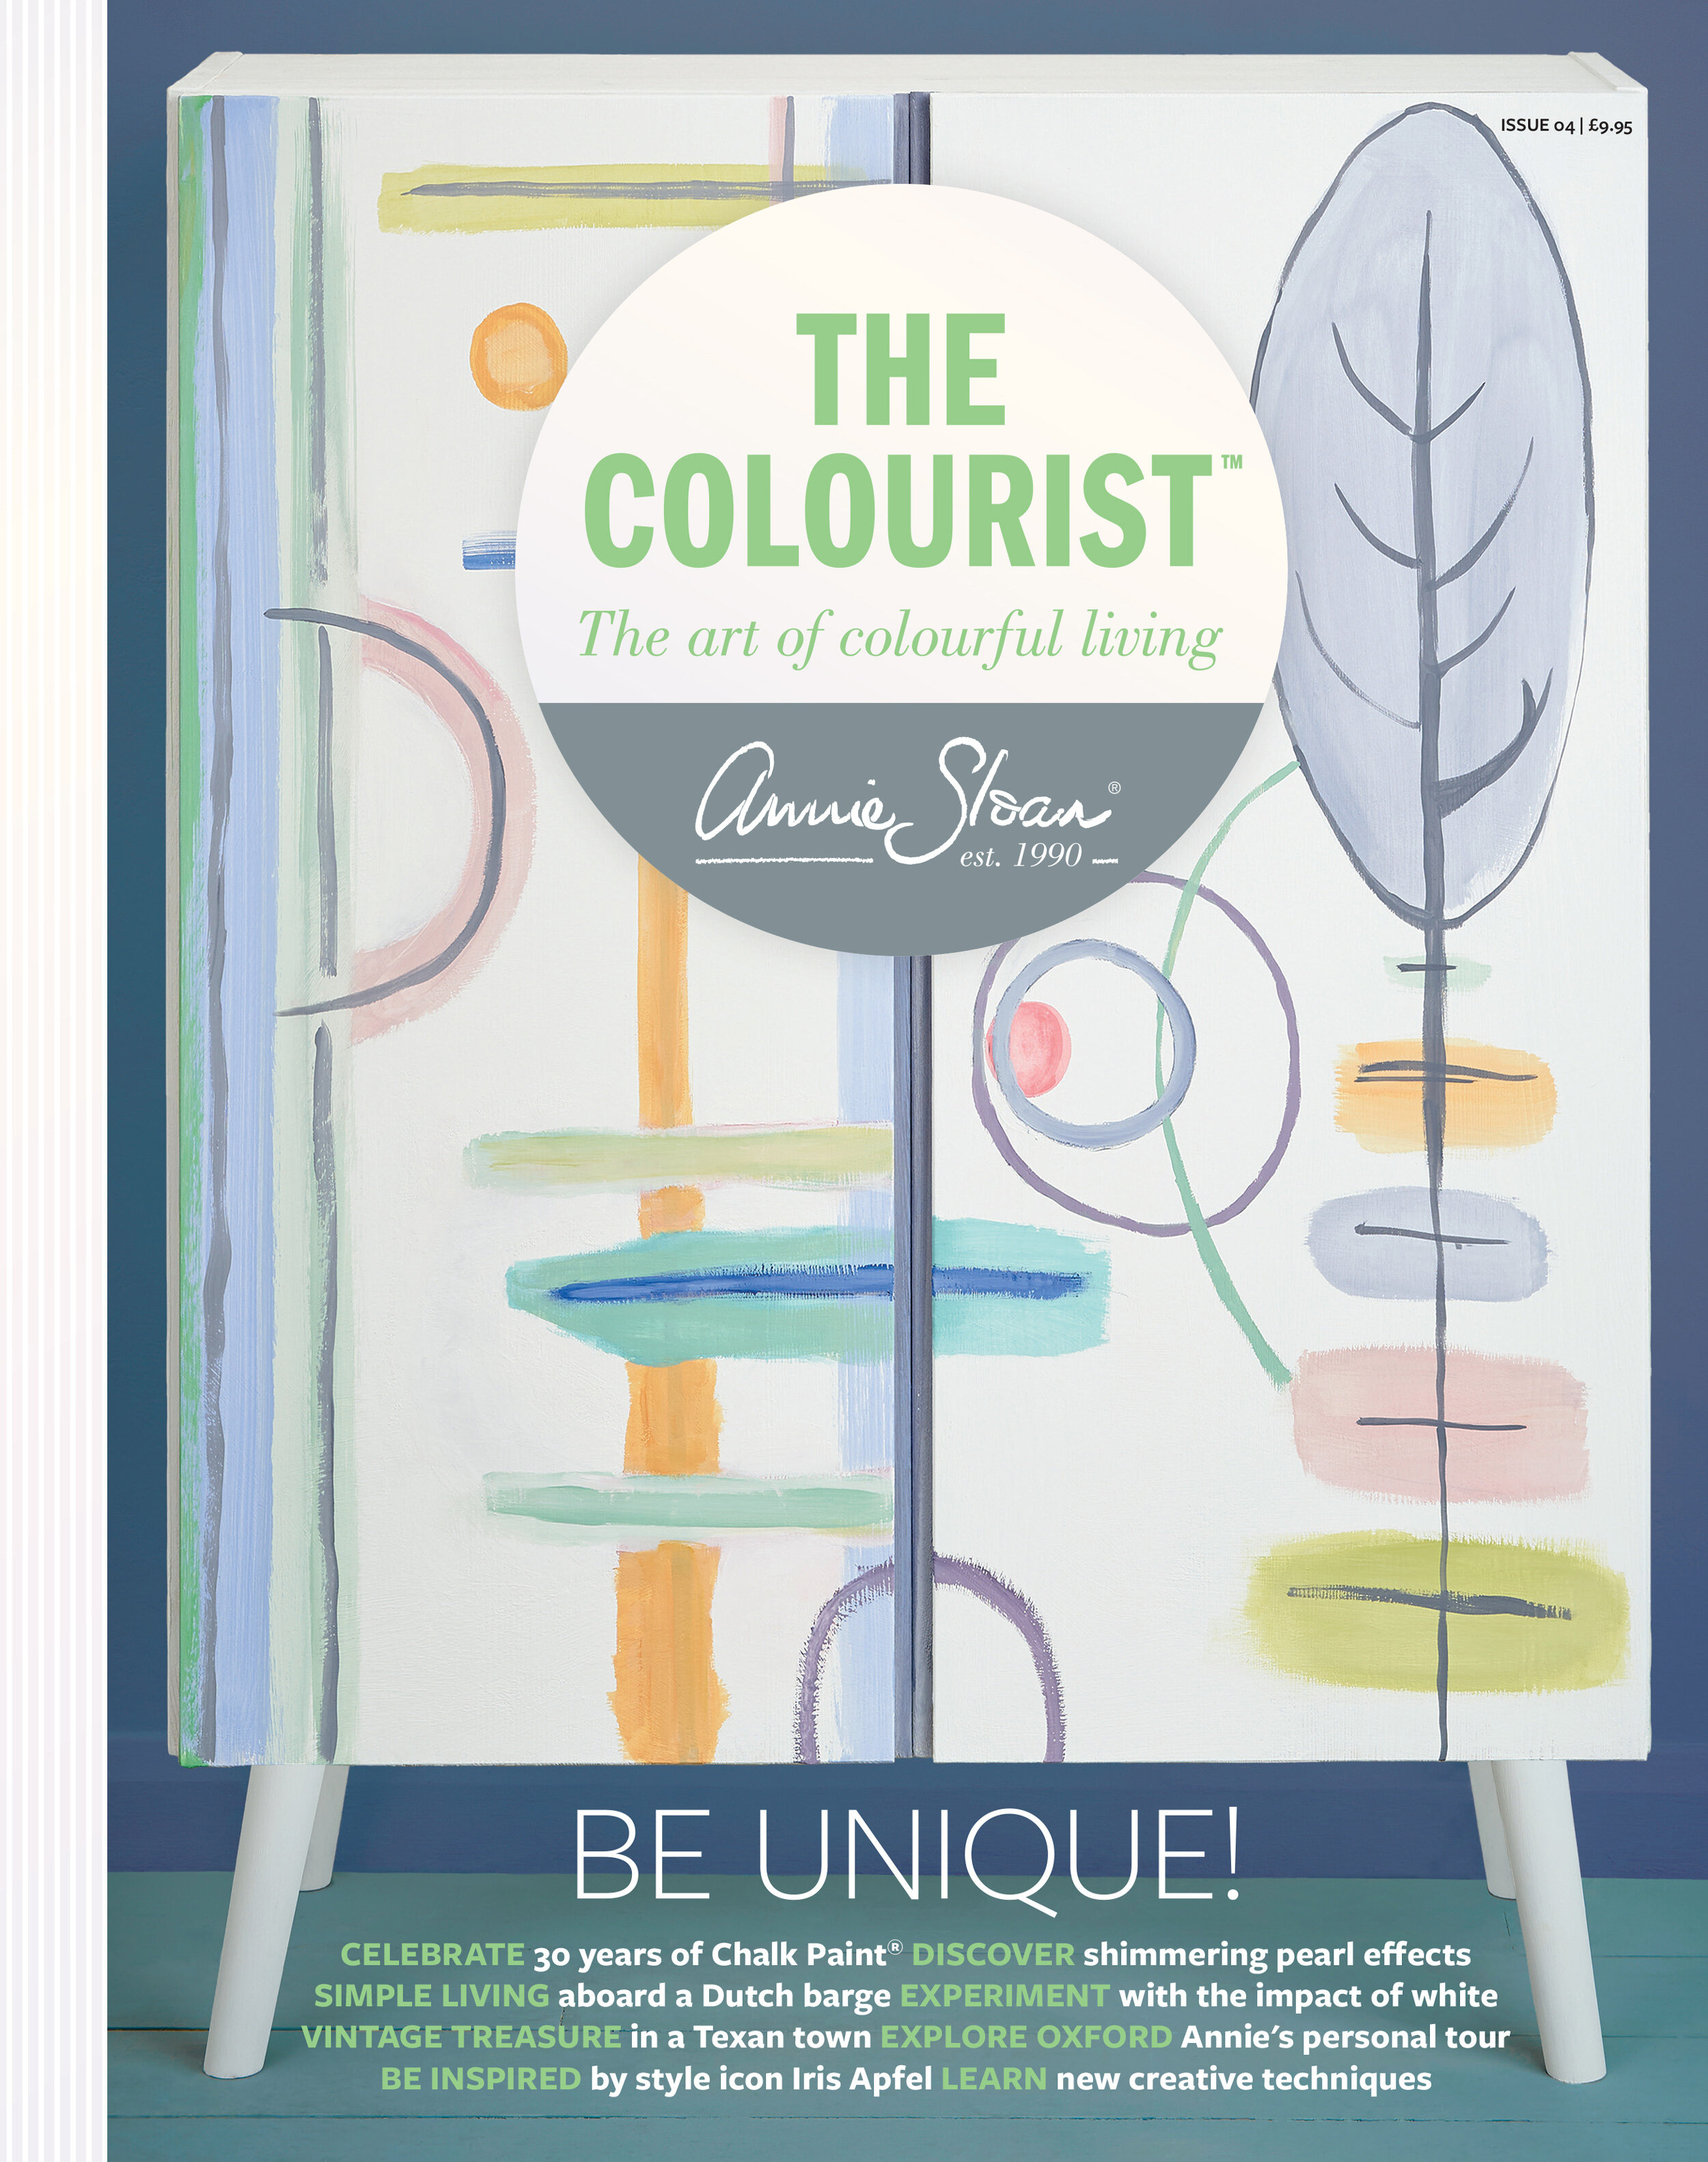 The Colourist Issue 4 by Annie Sloan cover.jpg